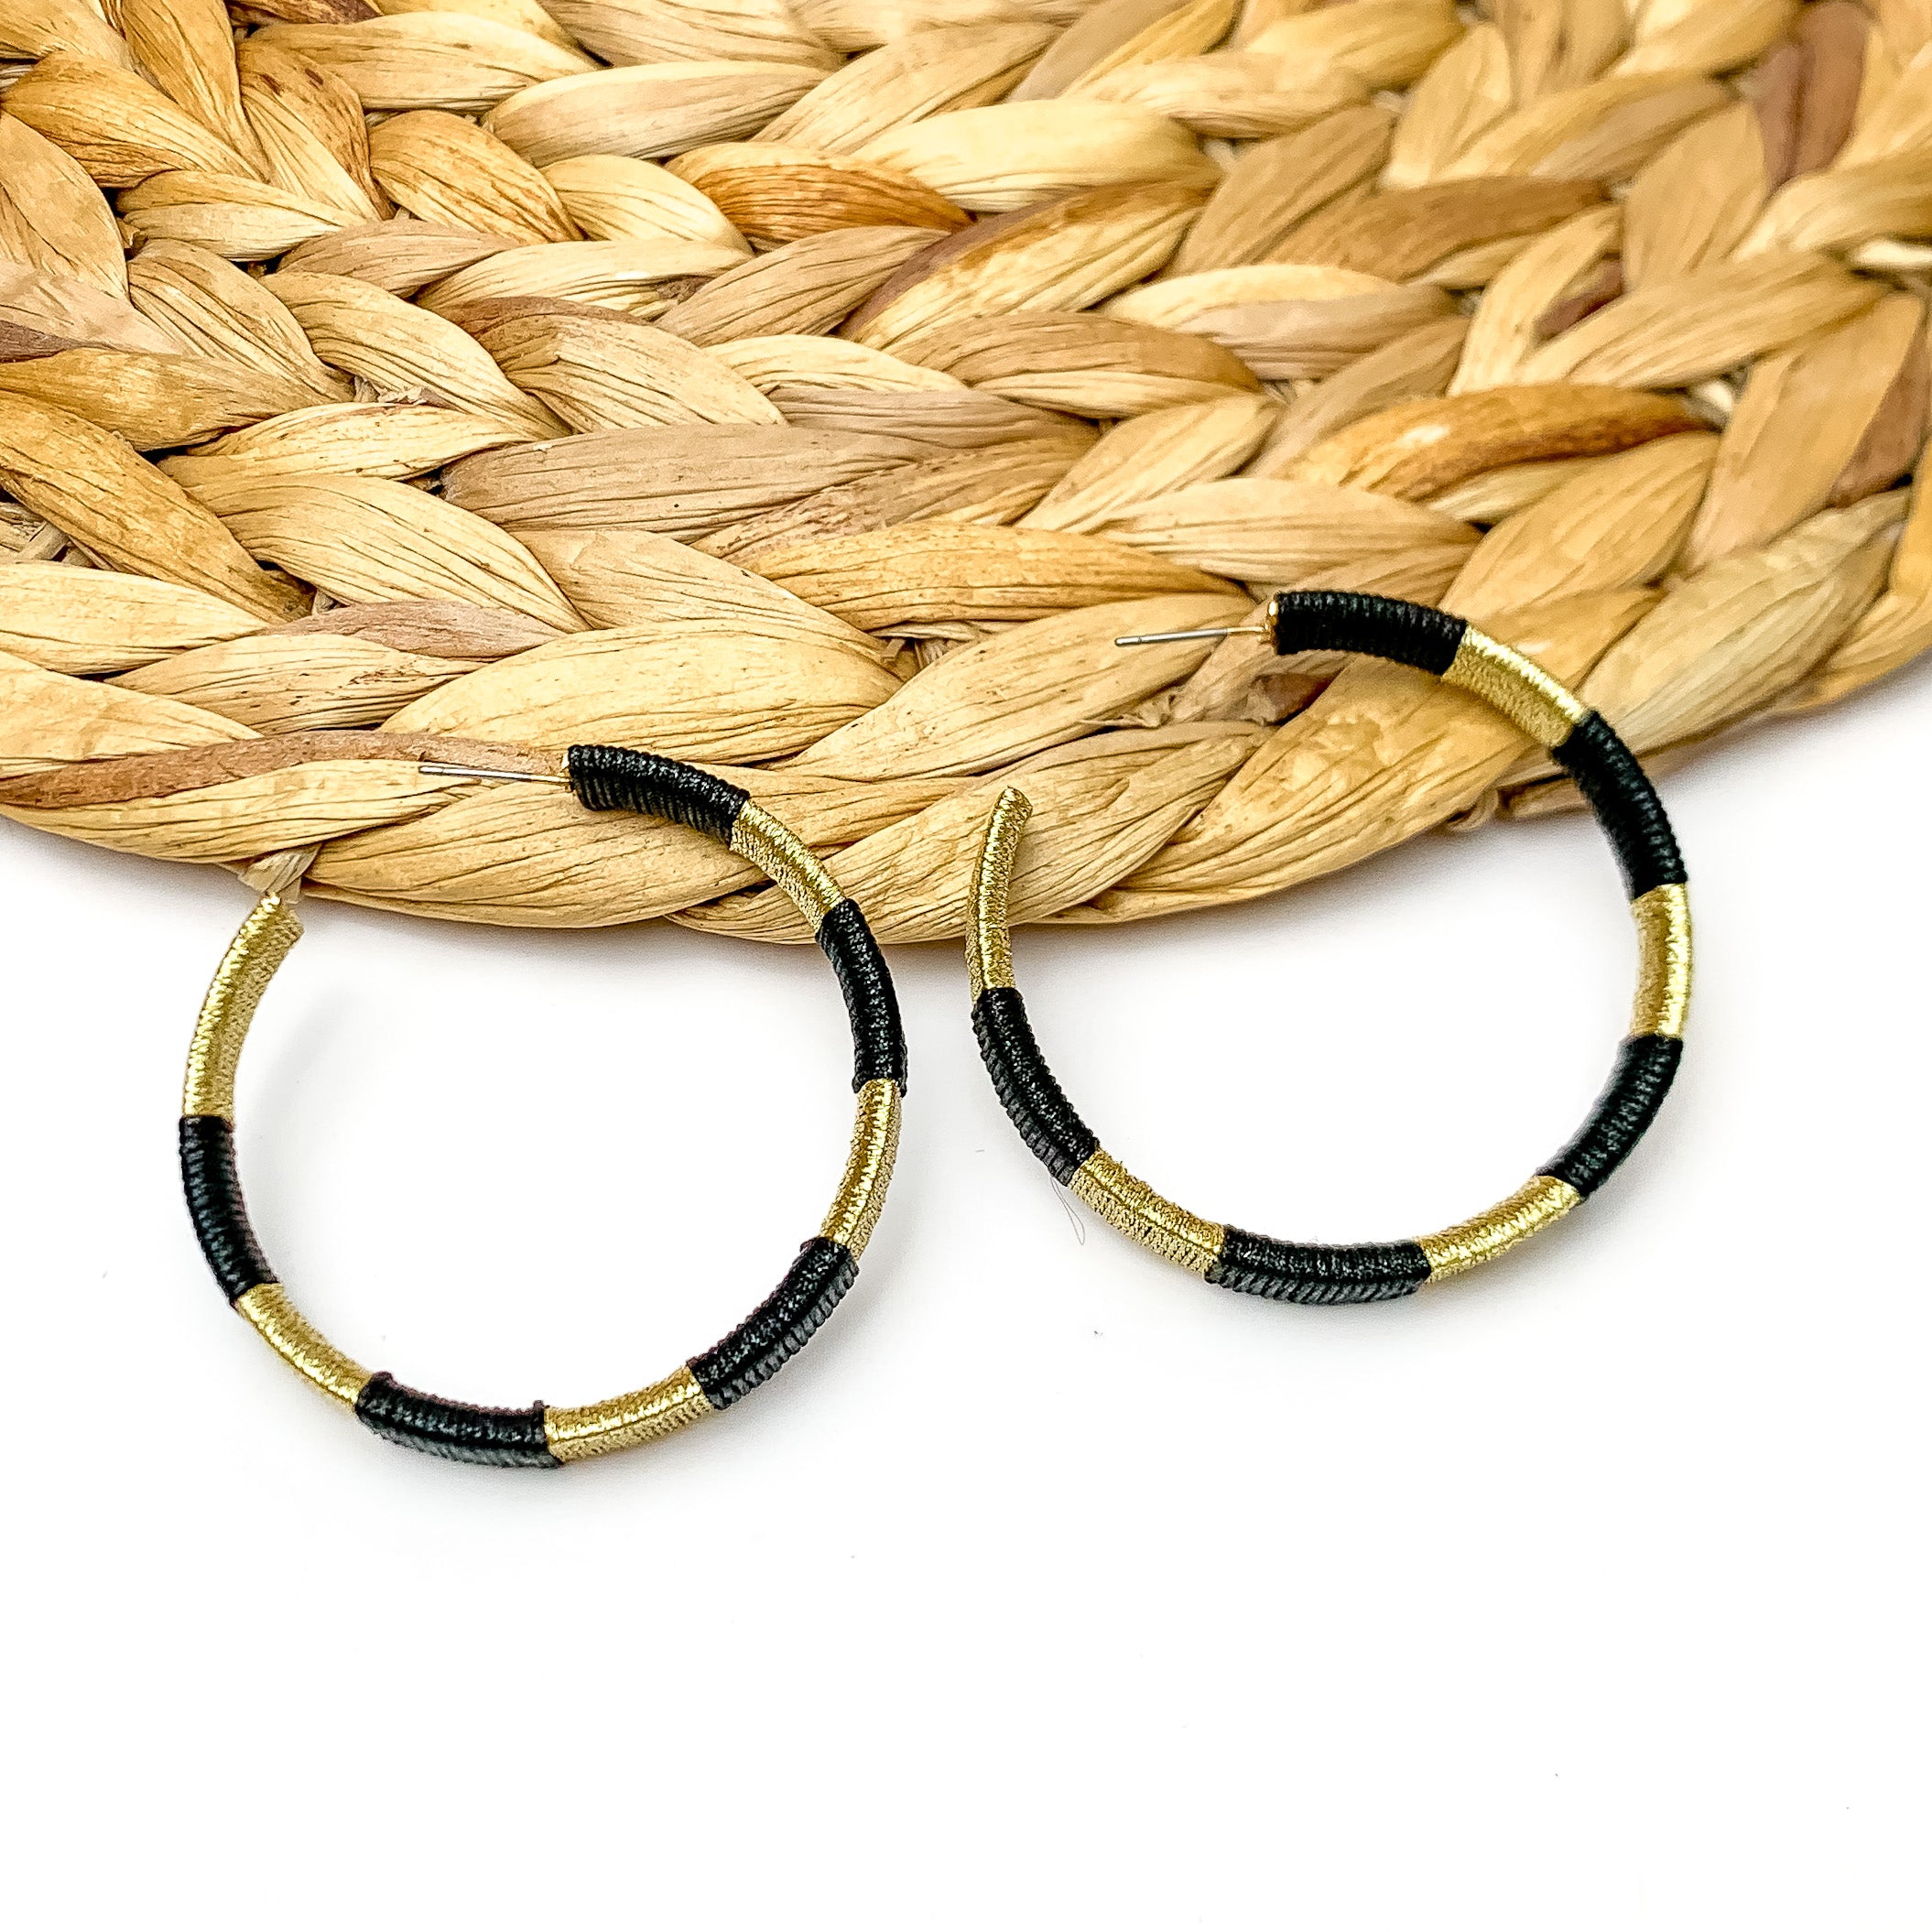 Game Day Glam Colored Hoop Earrings in Black and Gold. The two colored hoops are laying against a woven decoration with a white background.